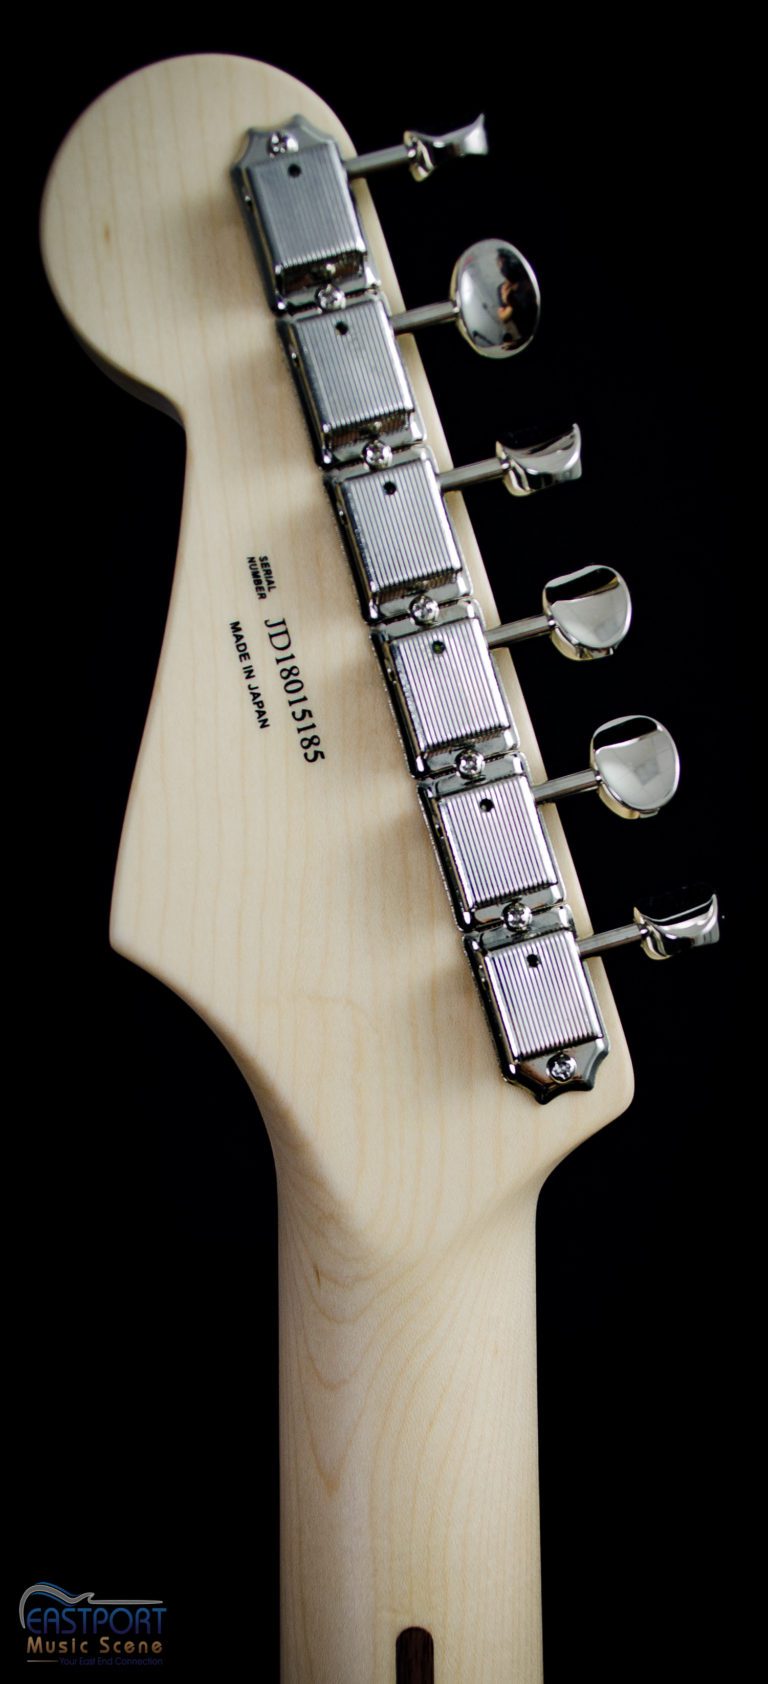 A close up of the back of an electric guitar